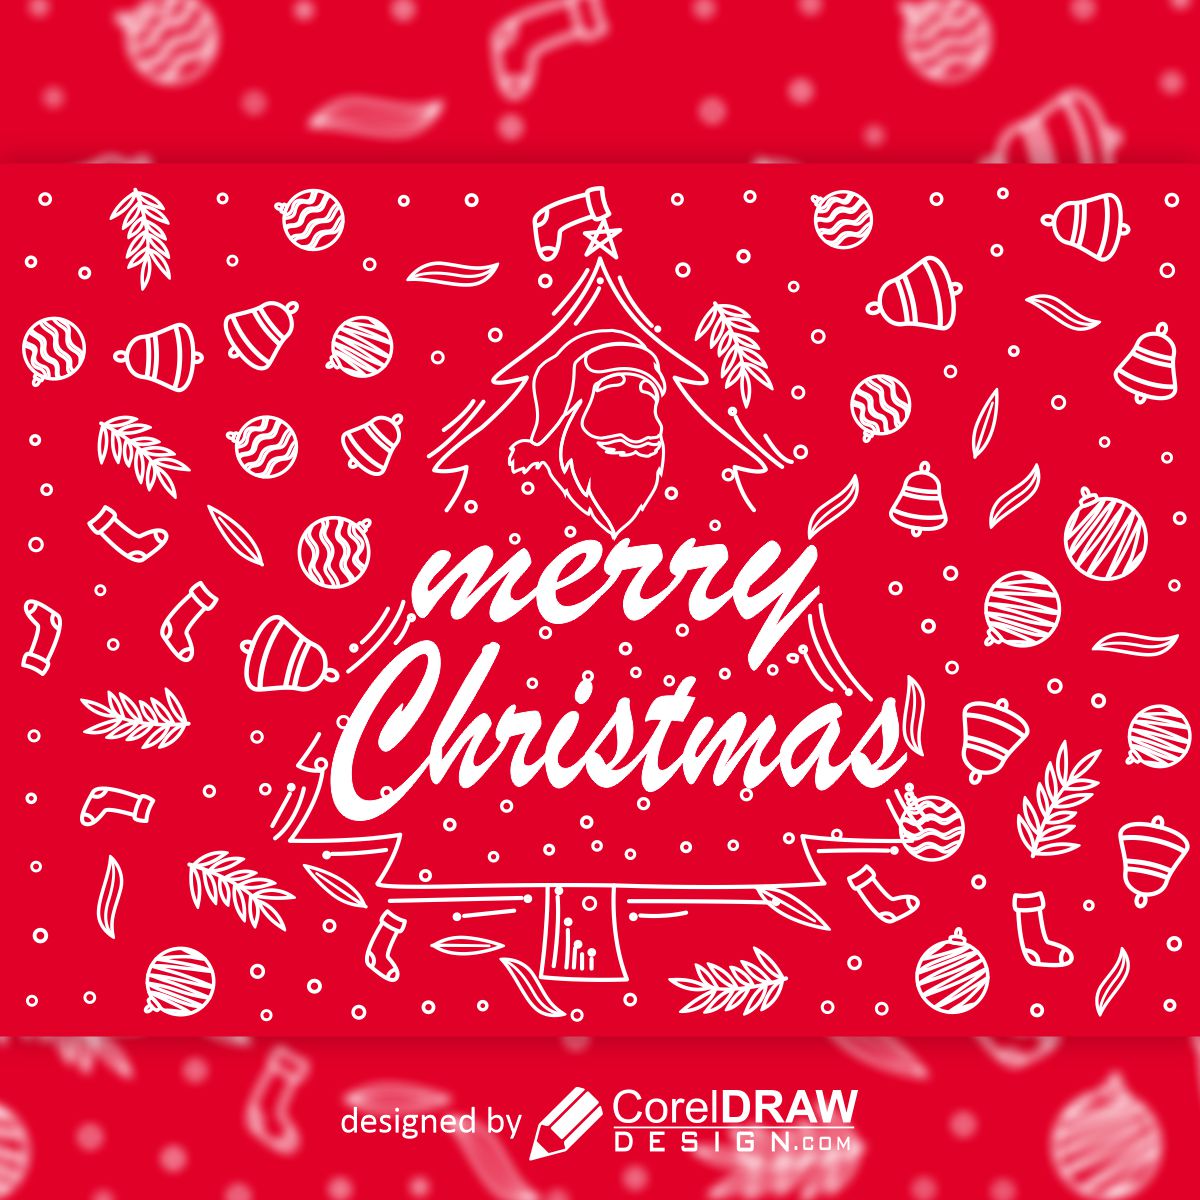 Merry Christmas poster vector design for free